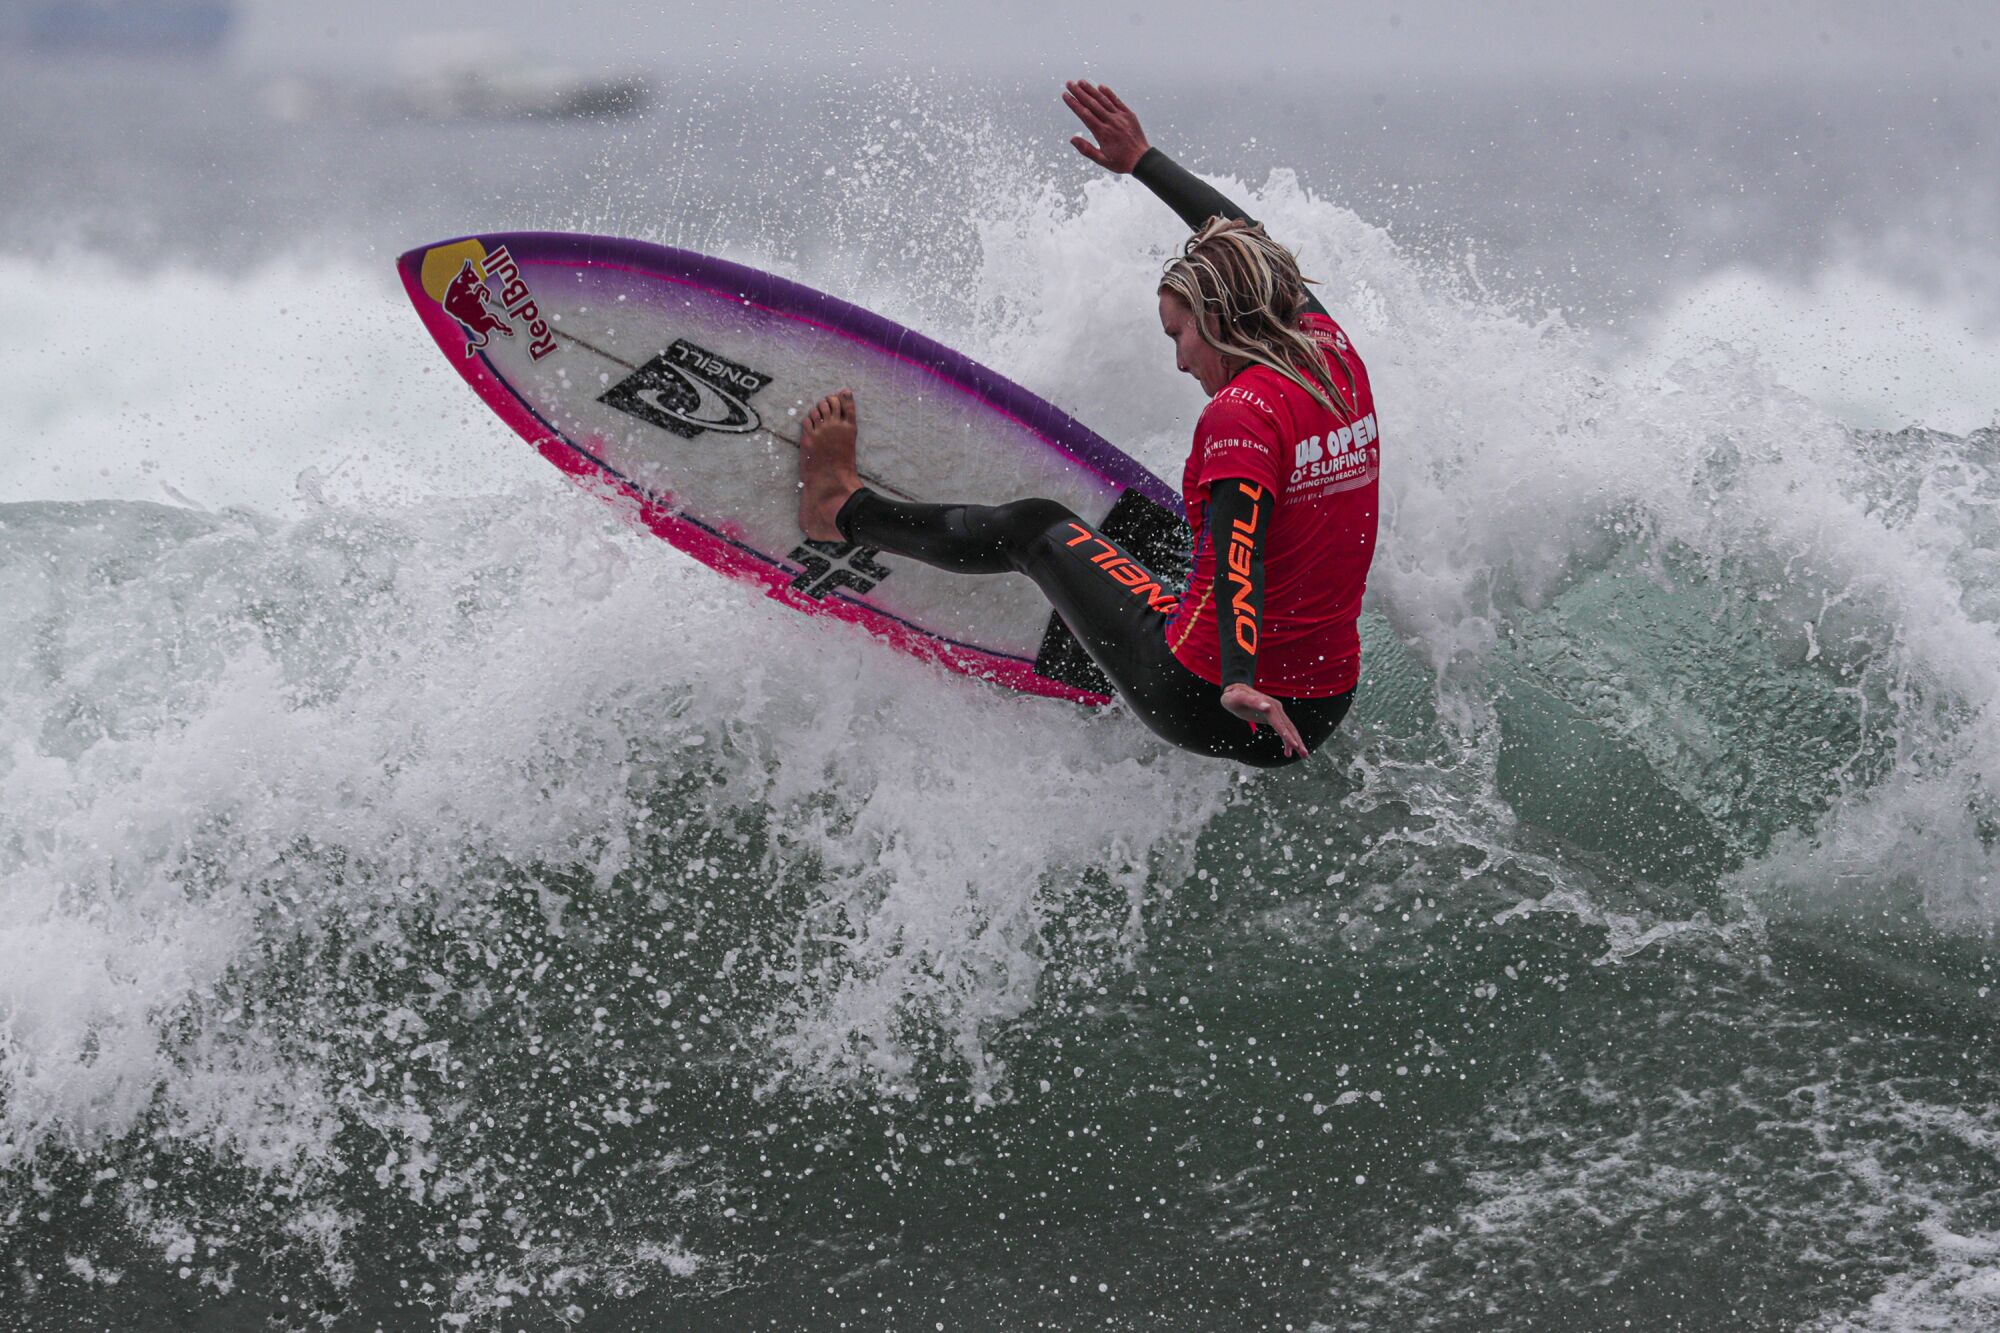 Caity Simmers competes in a preliminary heat to qualify for the final of the U.S. Open of Surfing